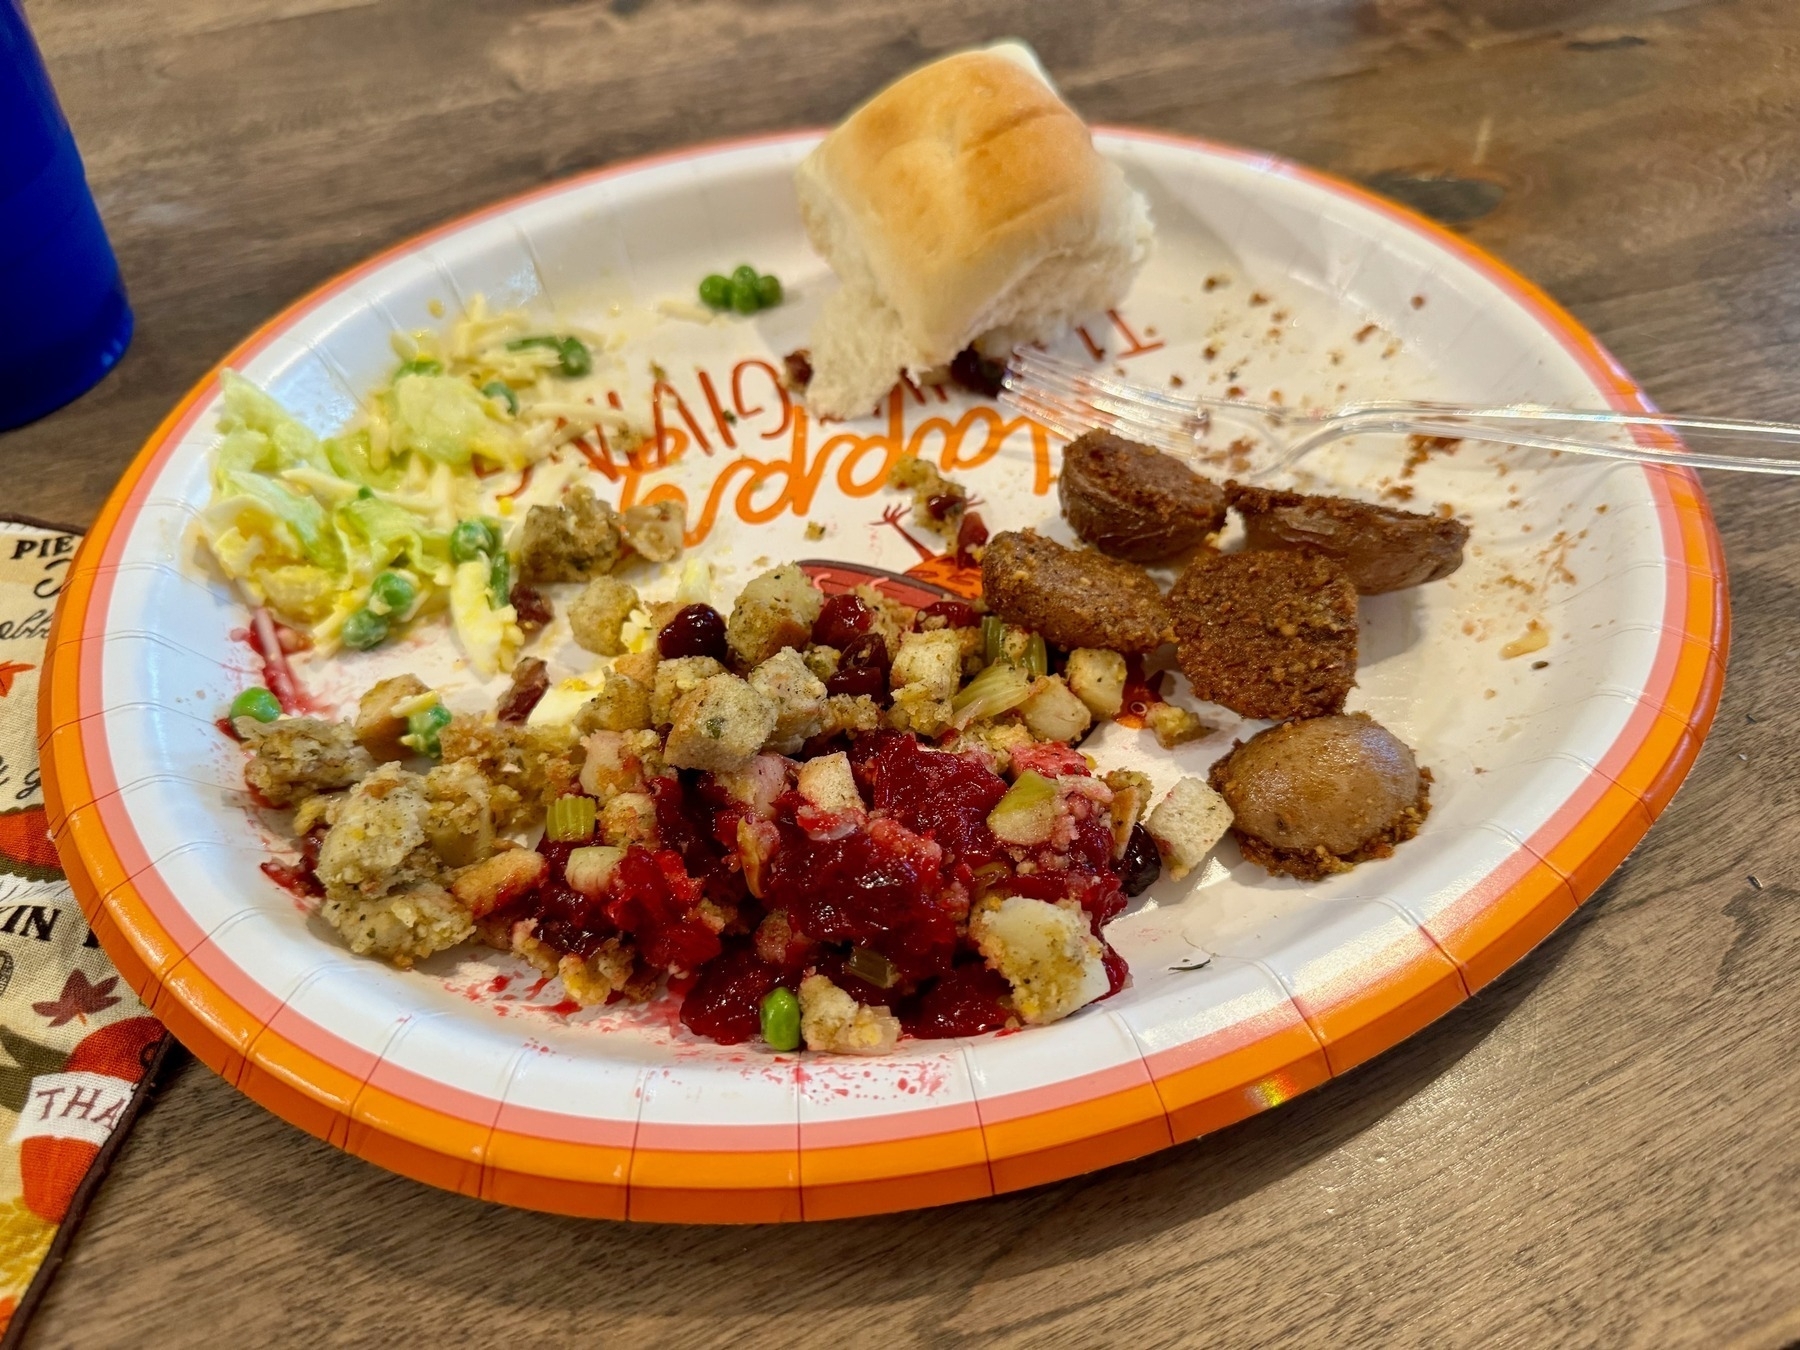 Various Thanksgiving food (stuffing / dressing, salad, potatoes, cranberry sauce, roll) on a paper plate, with a fork.